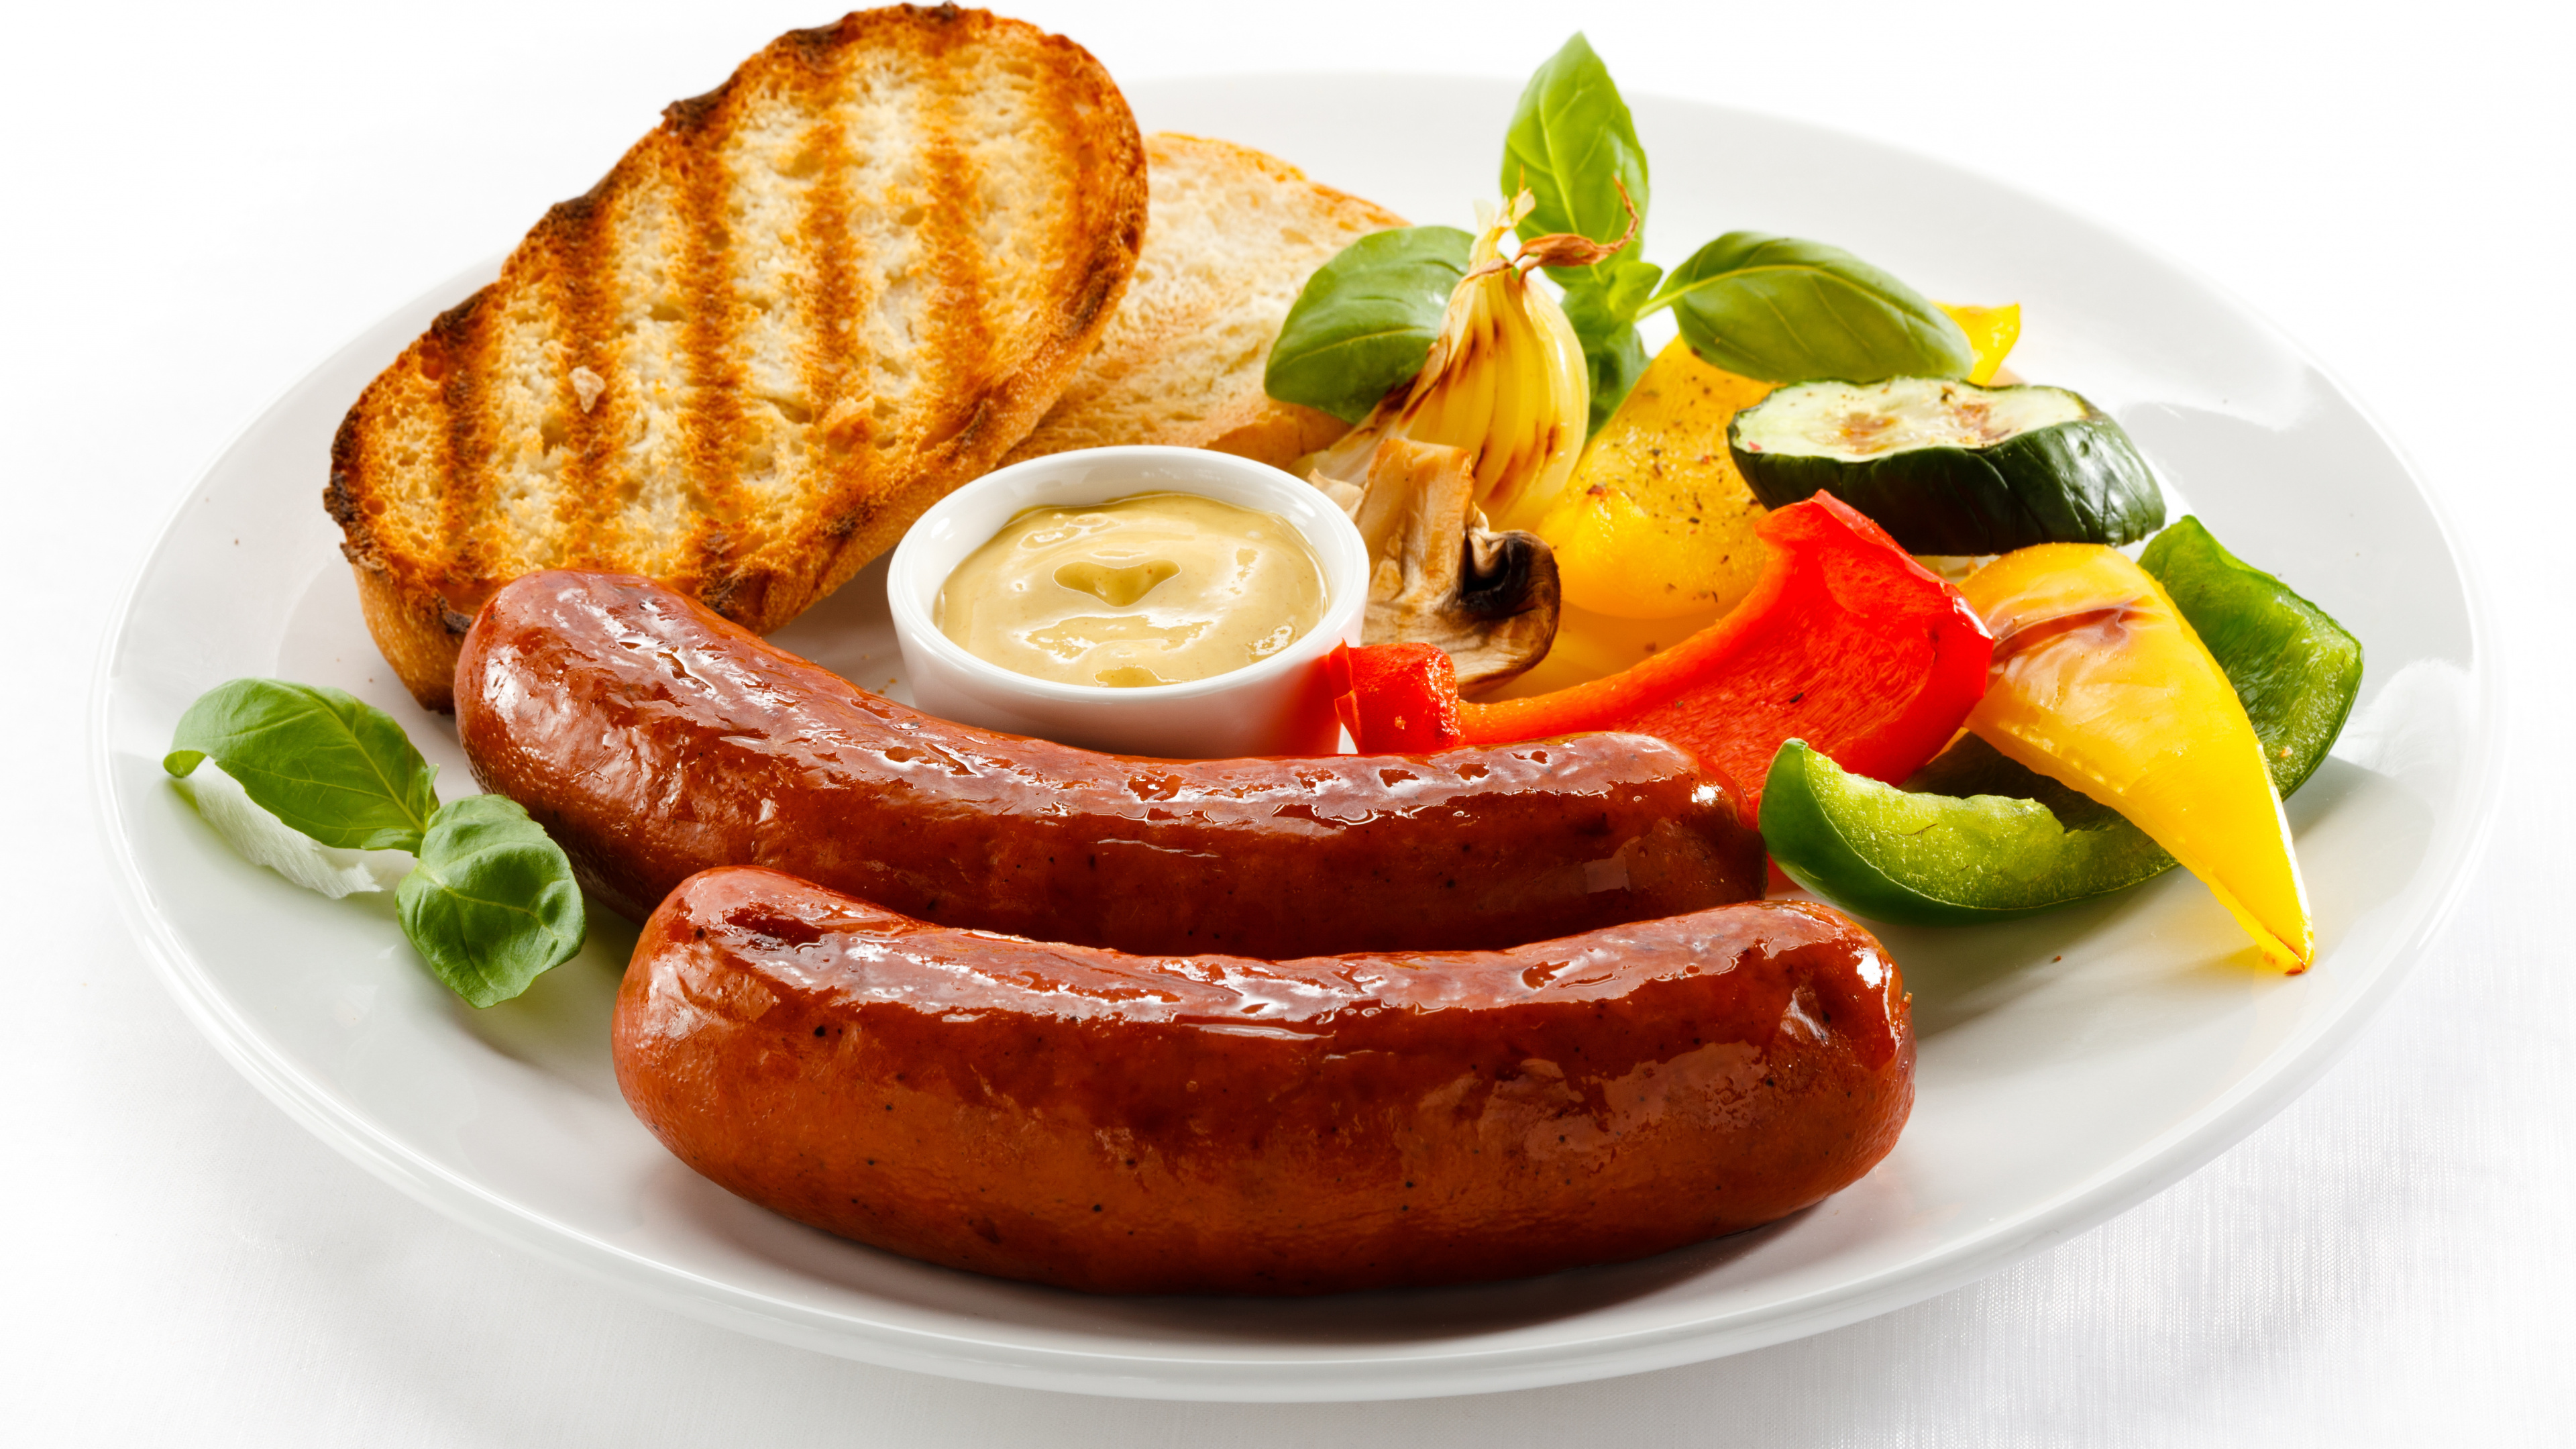 Sausage With Sliced Tomato and Cucumber on White Ceramic Plate. Wallpaper in 3840x2160 Resolution